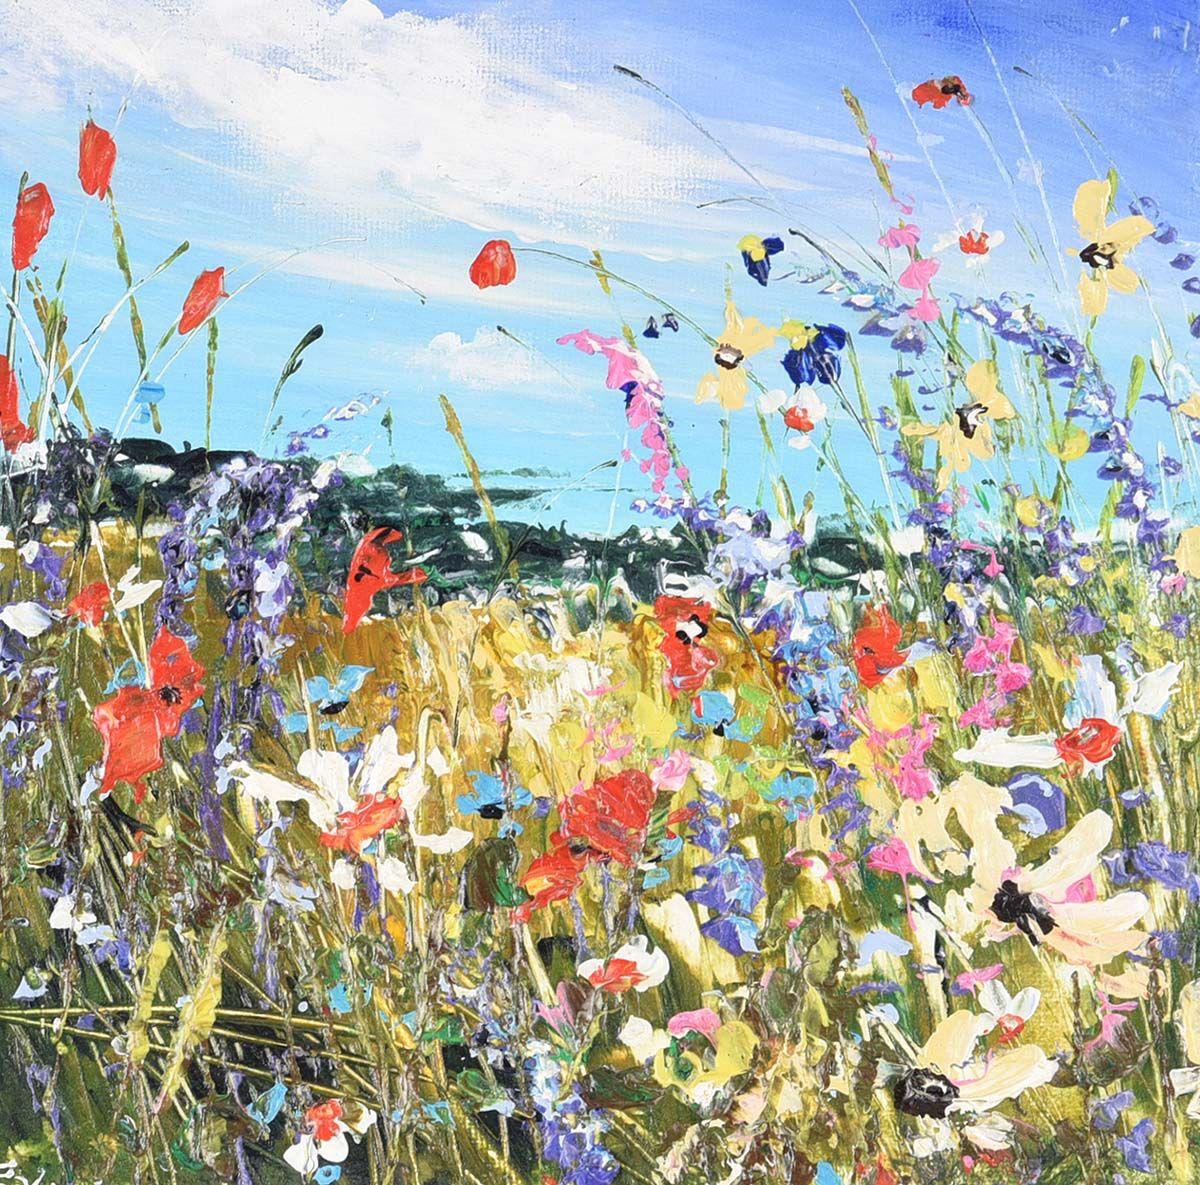 Colourful Impasto Wild Flower Meadow Painting by Contemporary British Artist